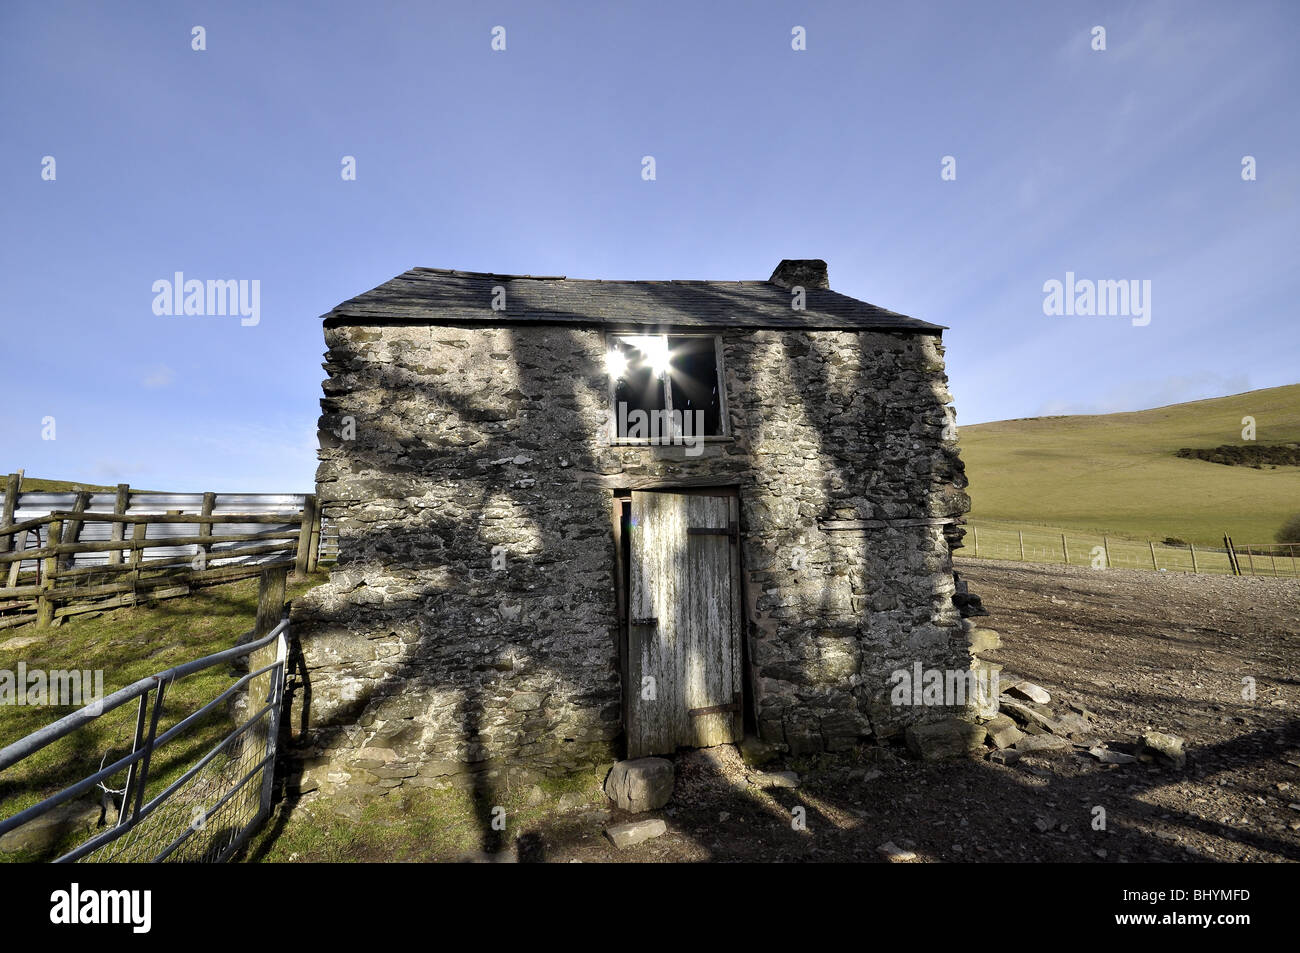 Welsh eerie barn with tree shadows Stock Photo